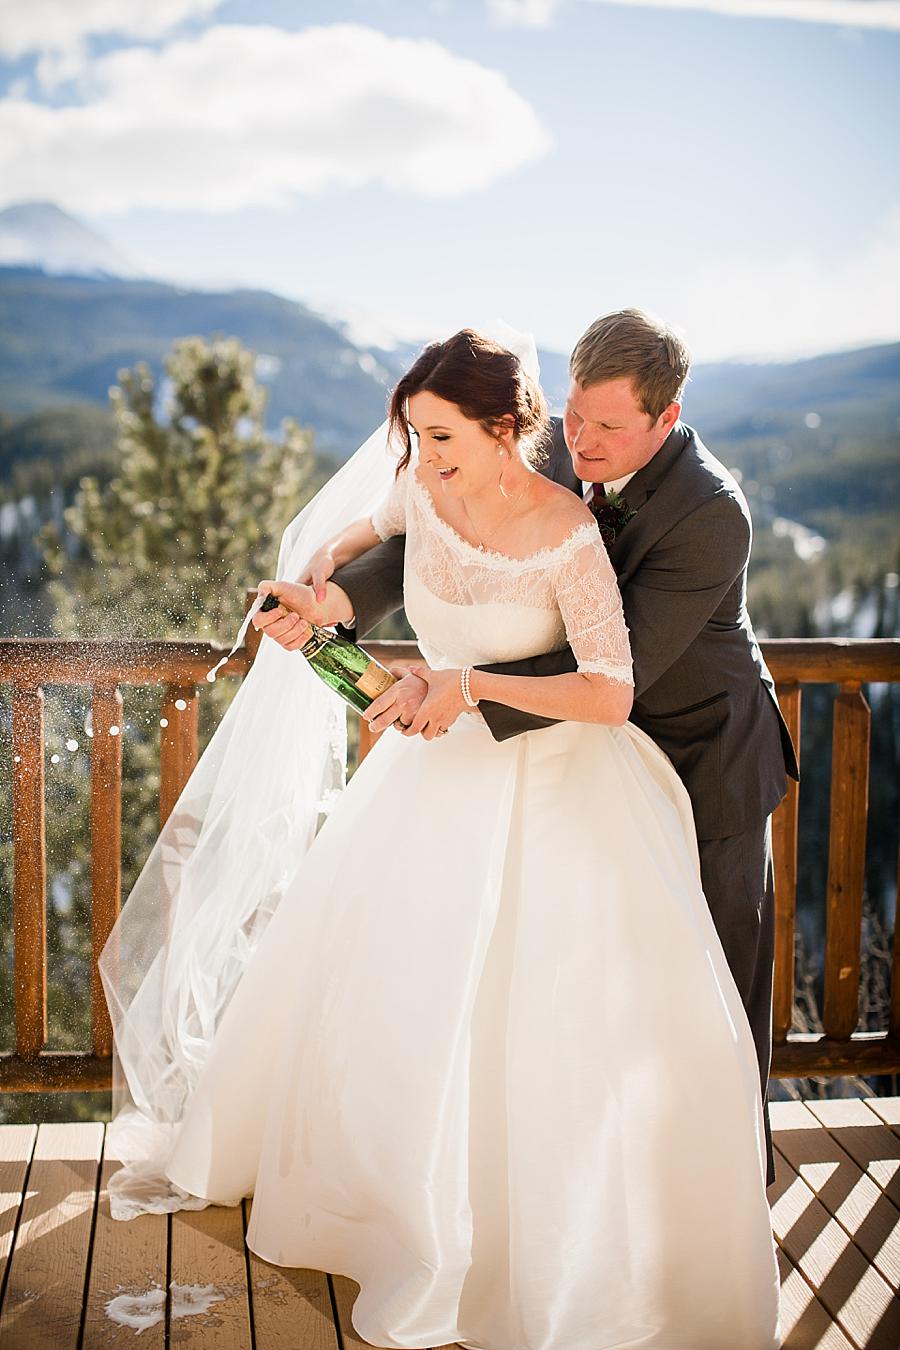 Popping champagne at this Colorado Destination Wedding by Knoxville Wedding Photographer, Amanda May Photos.